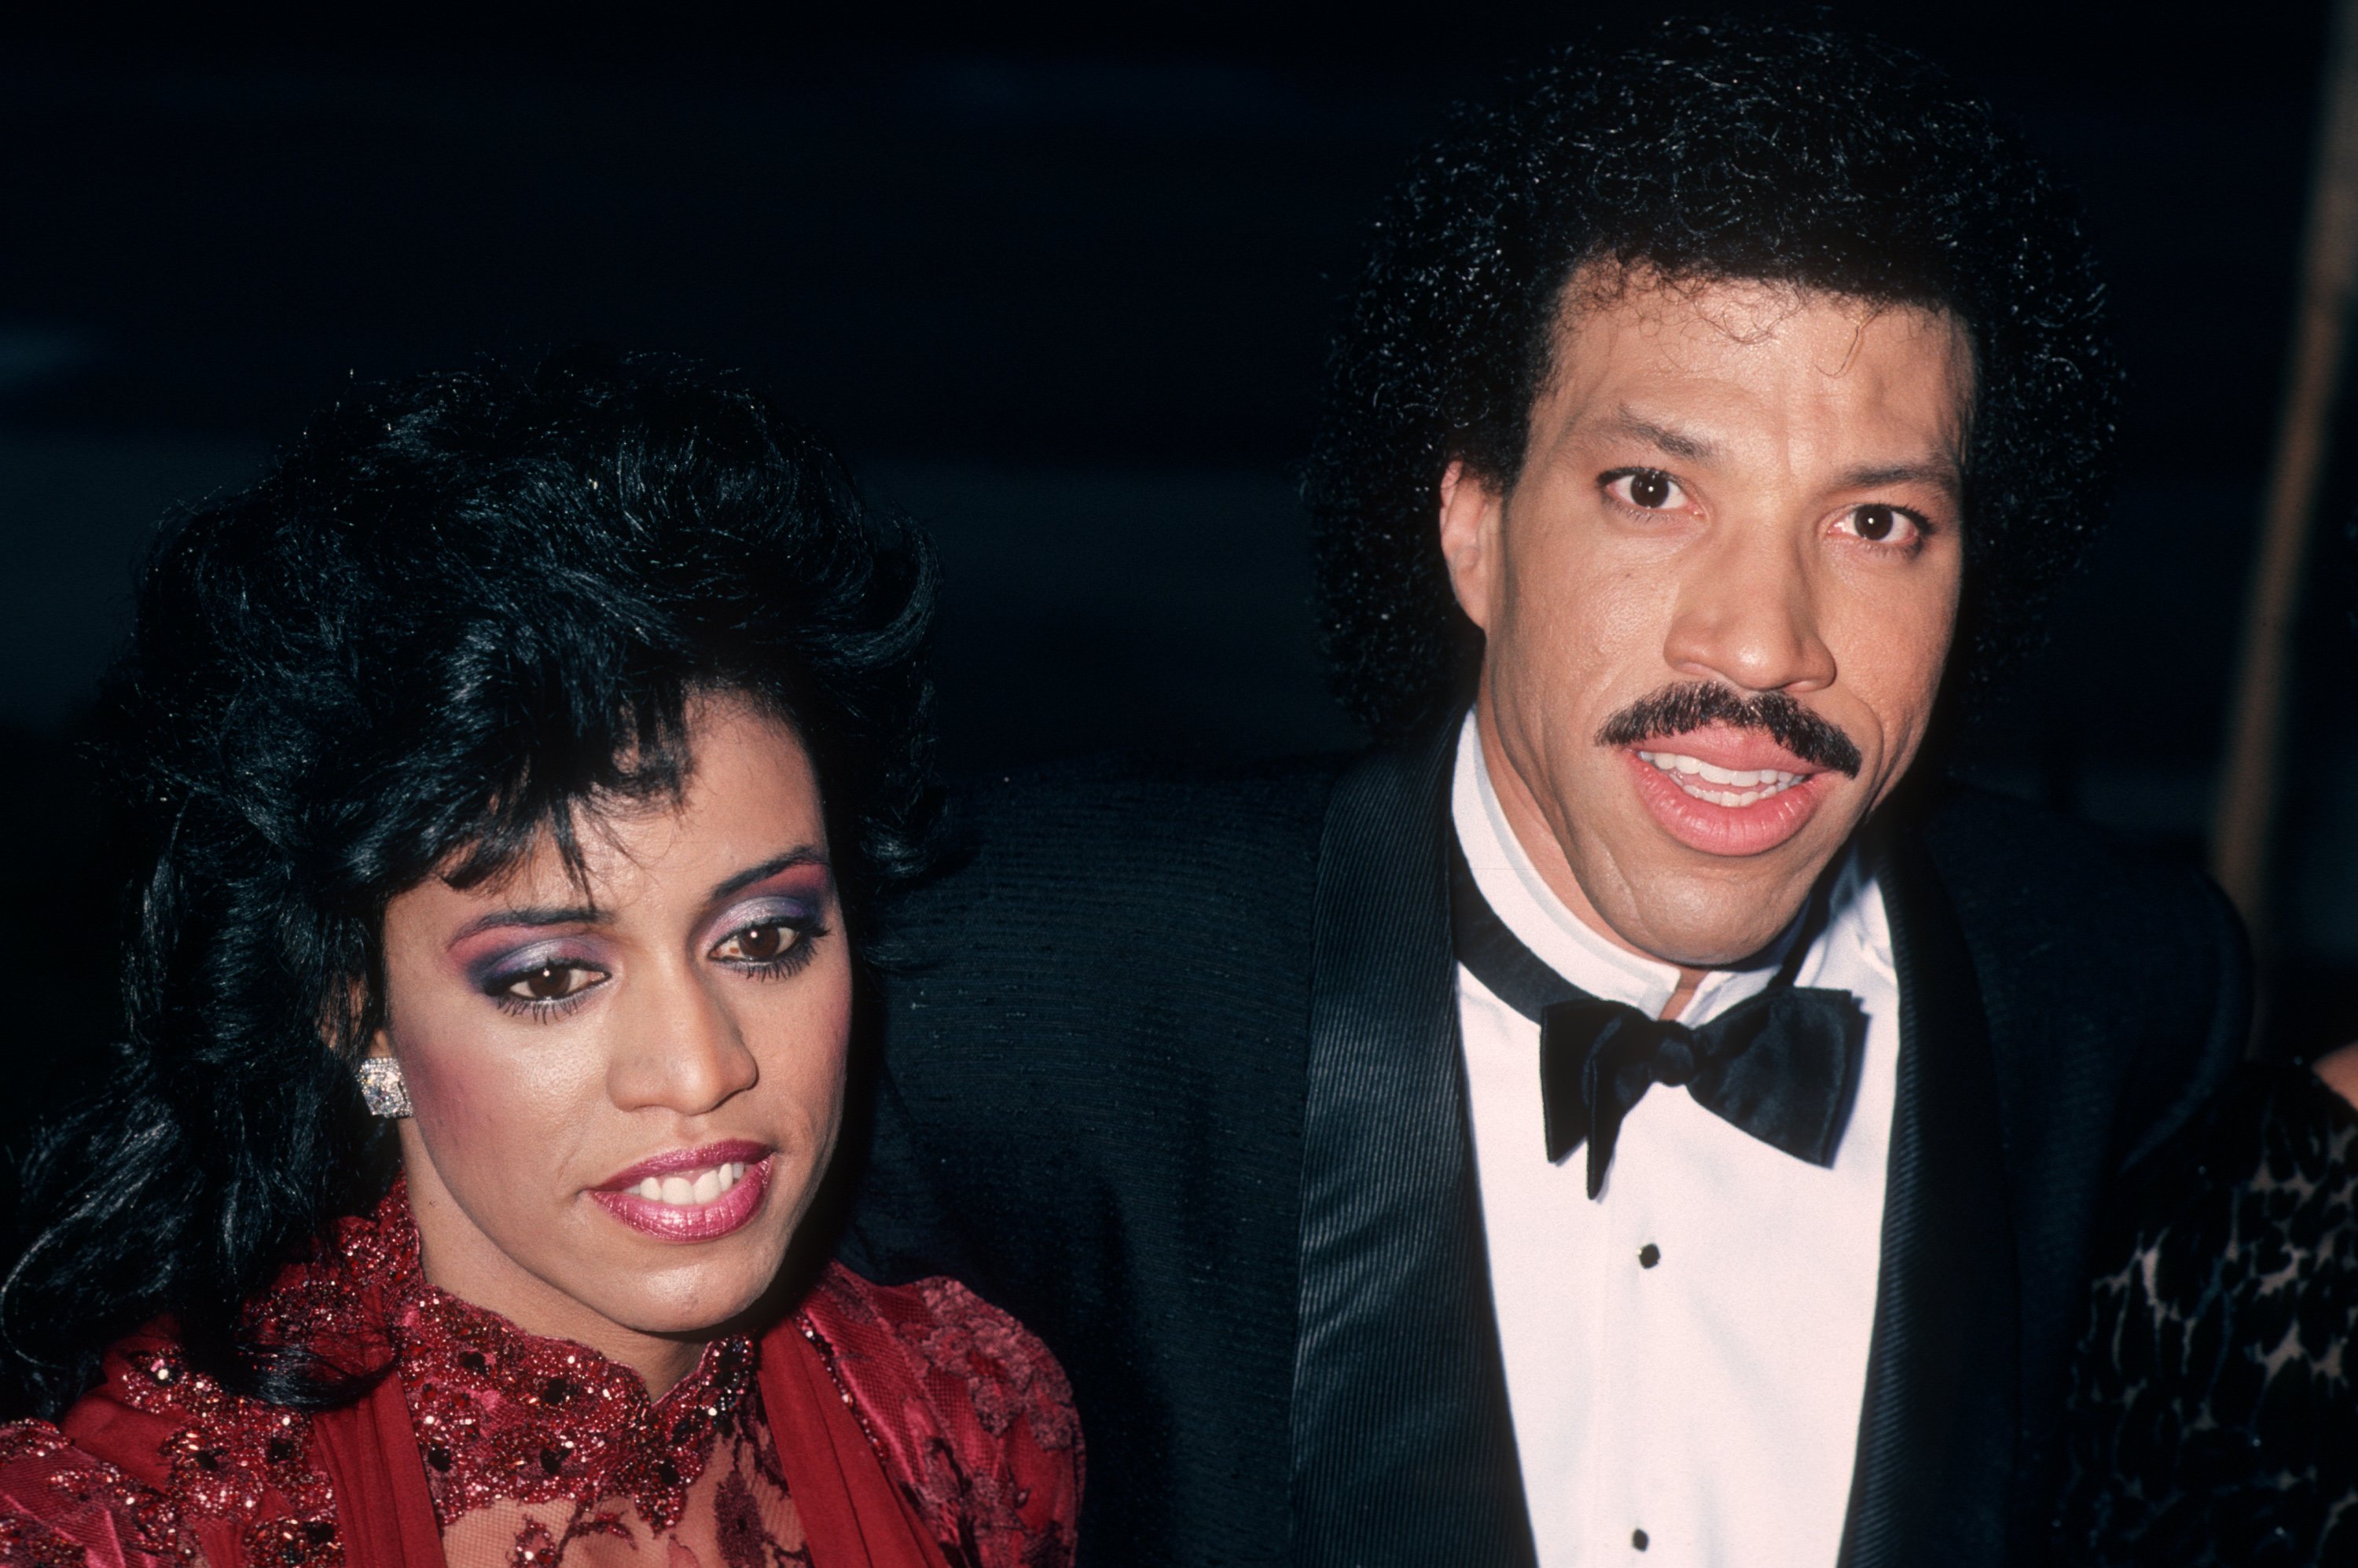 Musician Lionel Richie and Brenda Harvey during the 58th Annual Academy Awards on March 24, 1986 at the Dorothy Chandler Pavilion in Los Angeles, California. / Source: Getty Images